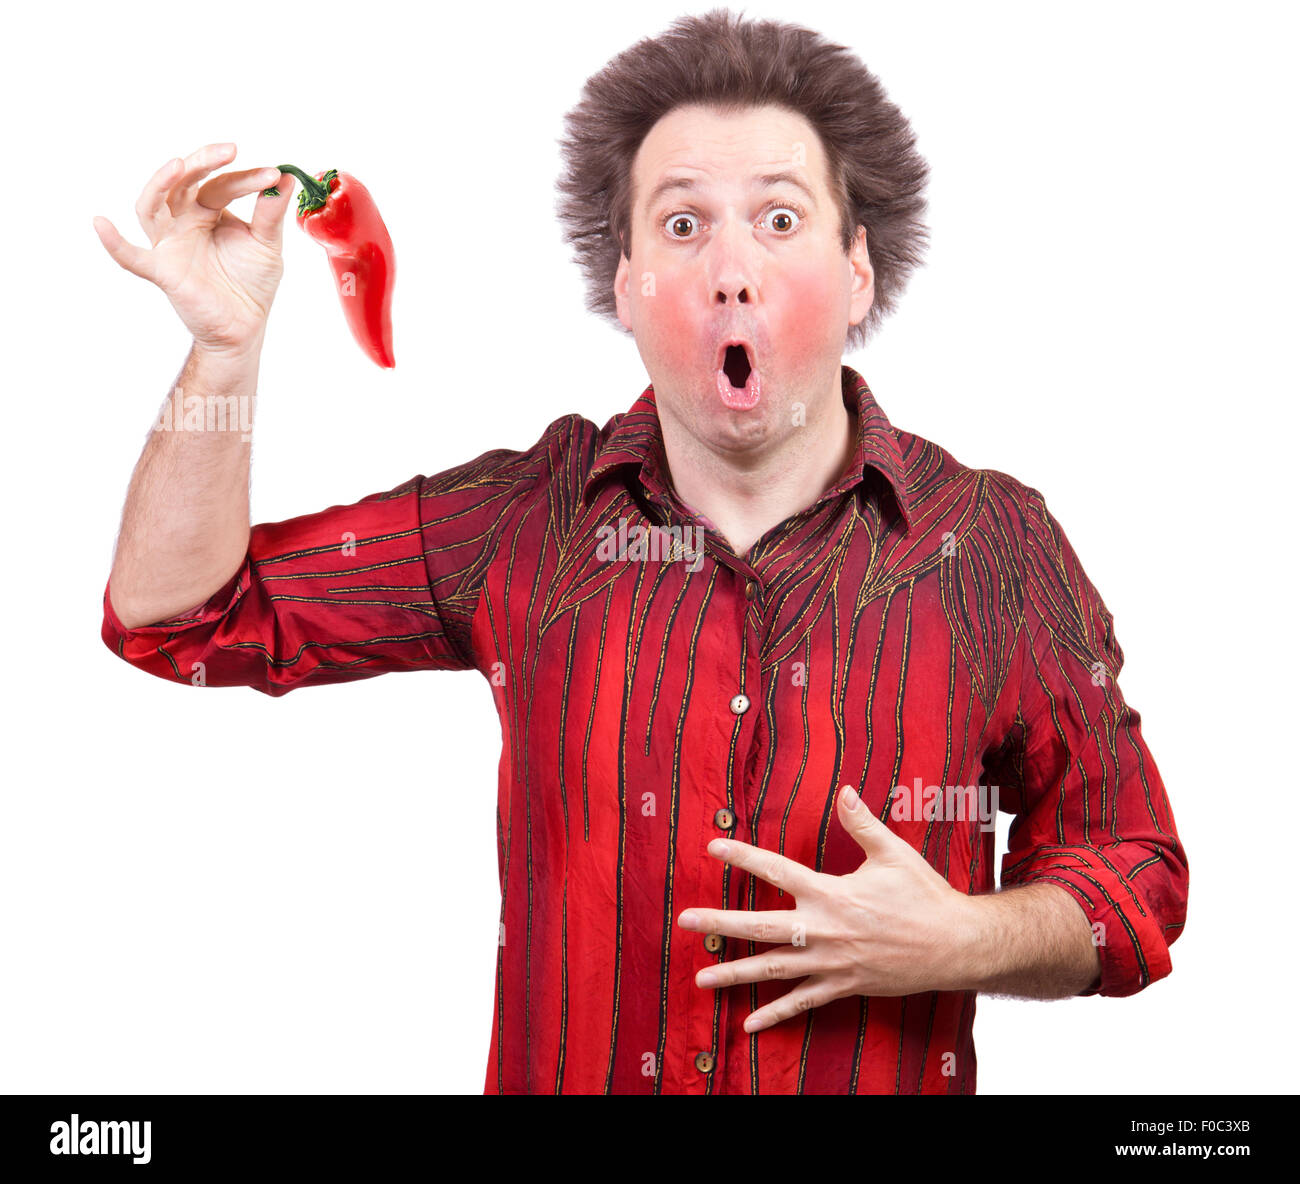 Man holding a spicy red paprika Stock Photo